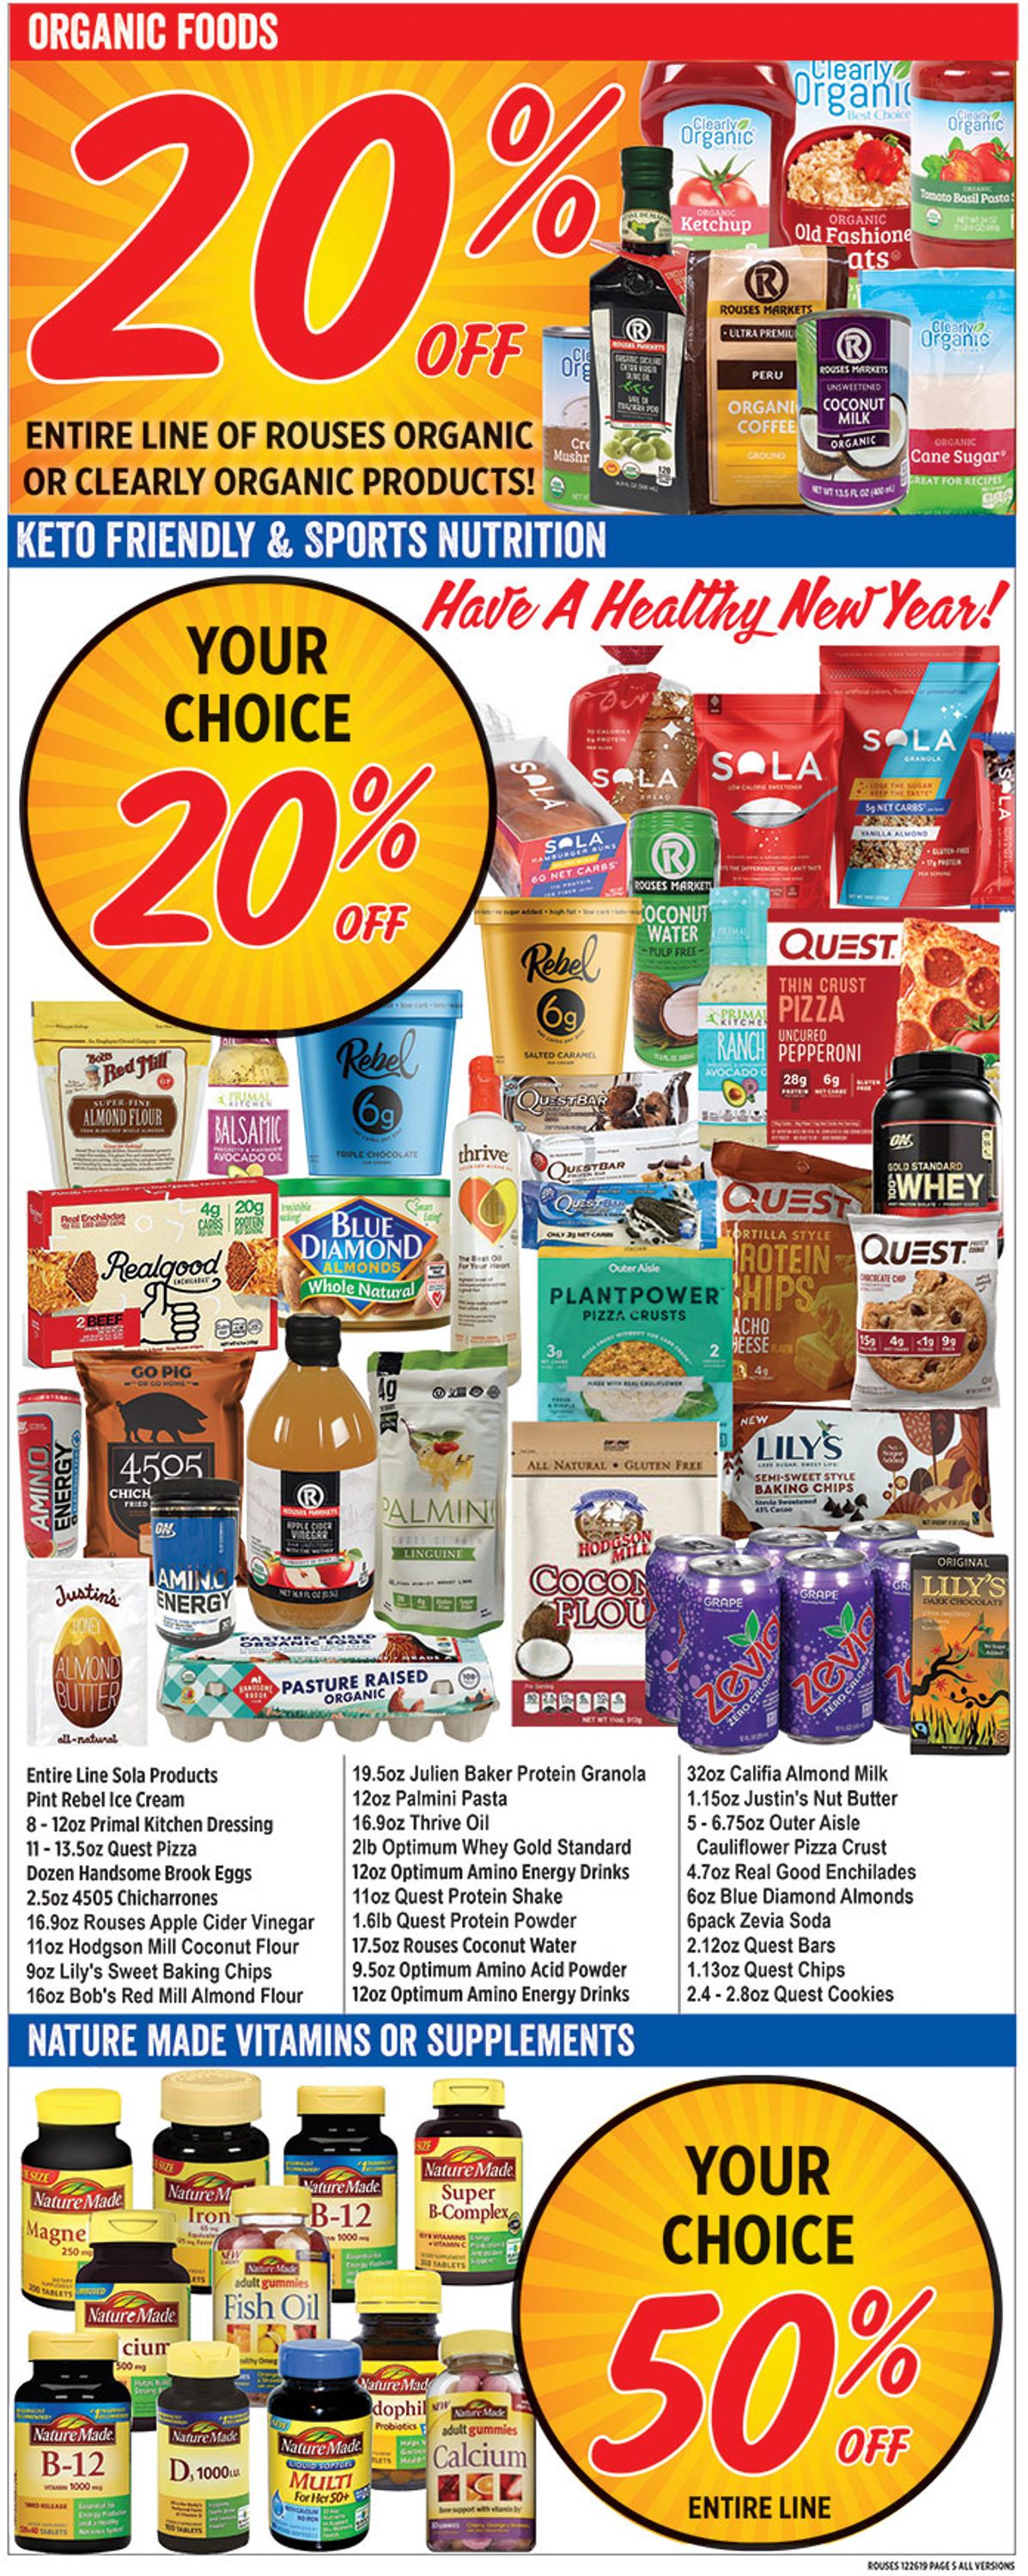 Rouses - New Year's Ad 2019/2020 Weekly Ad Circular - valid 12/26-01/01/2020 (Page 7)